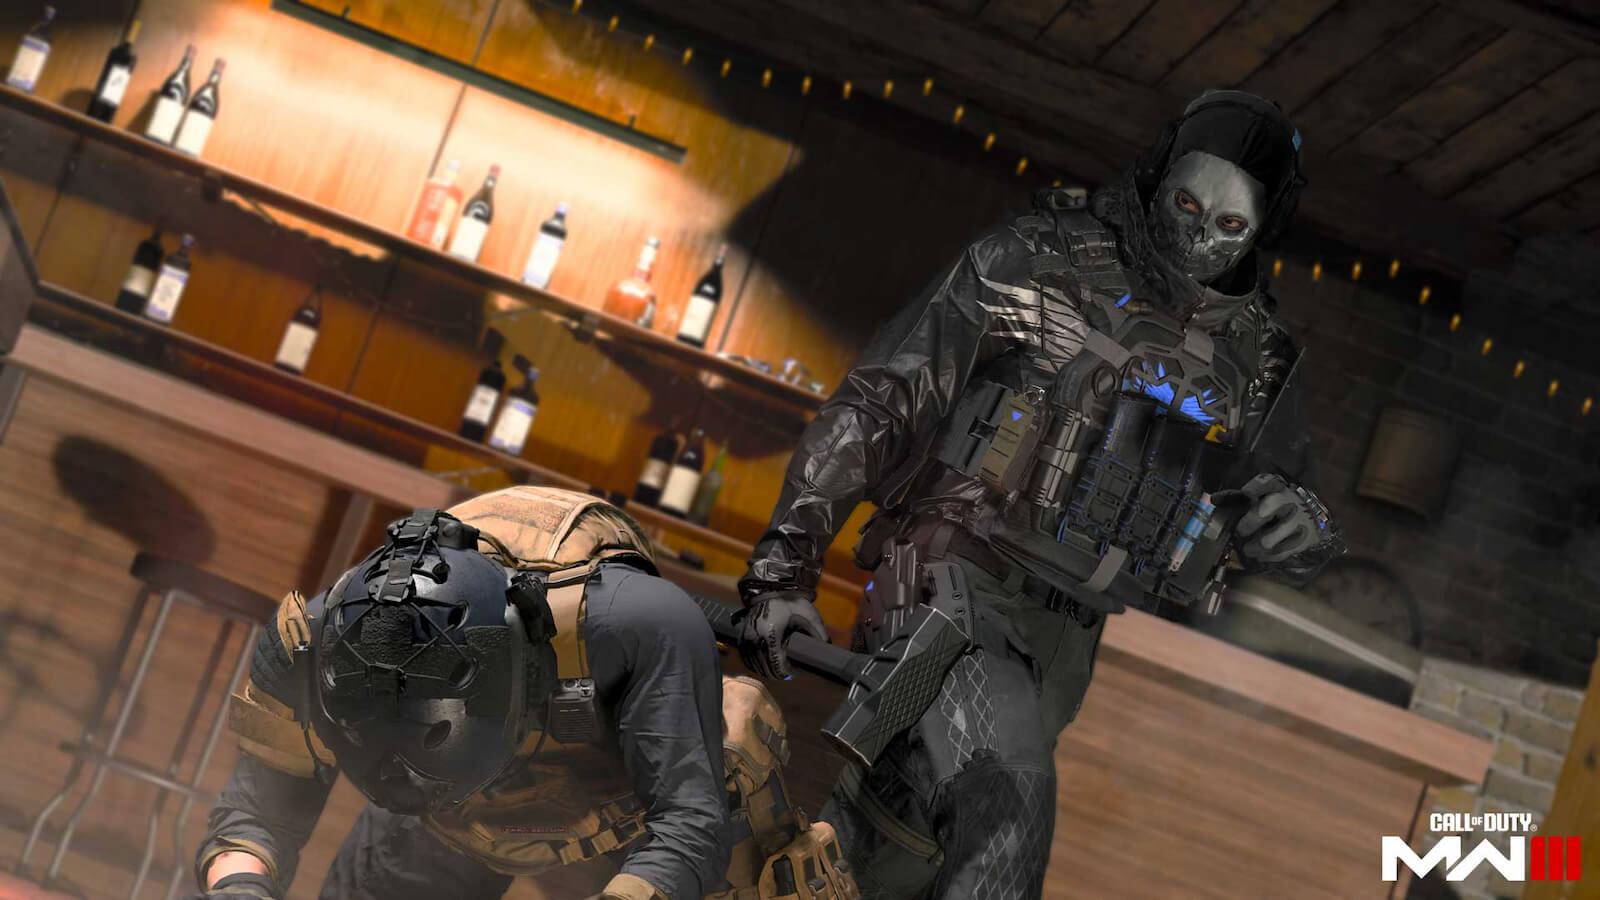 Max level MW3 players aren’t happy with the upcoming Double XP event